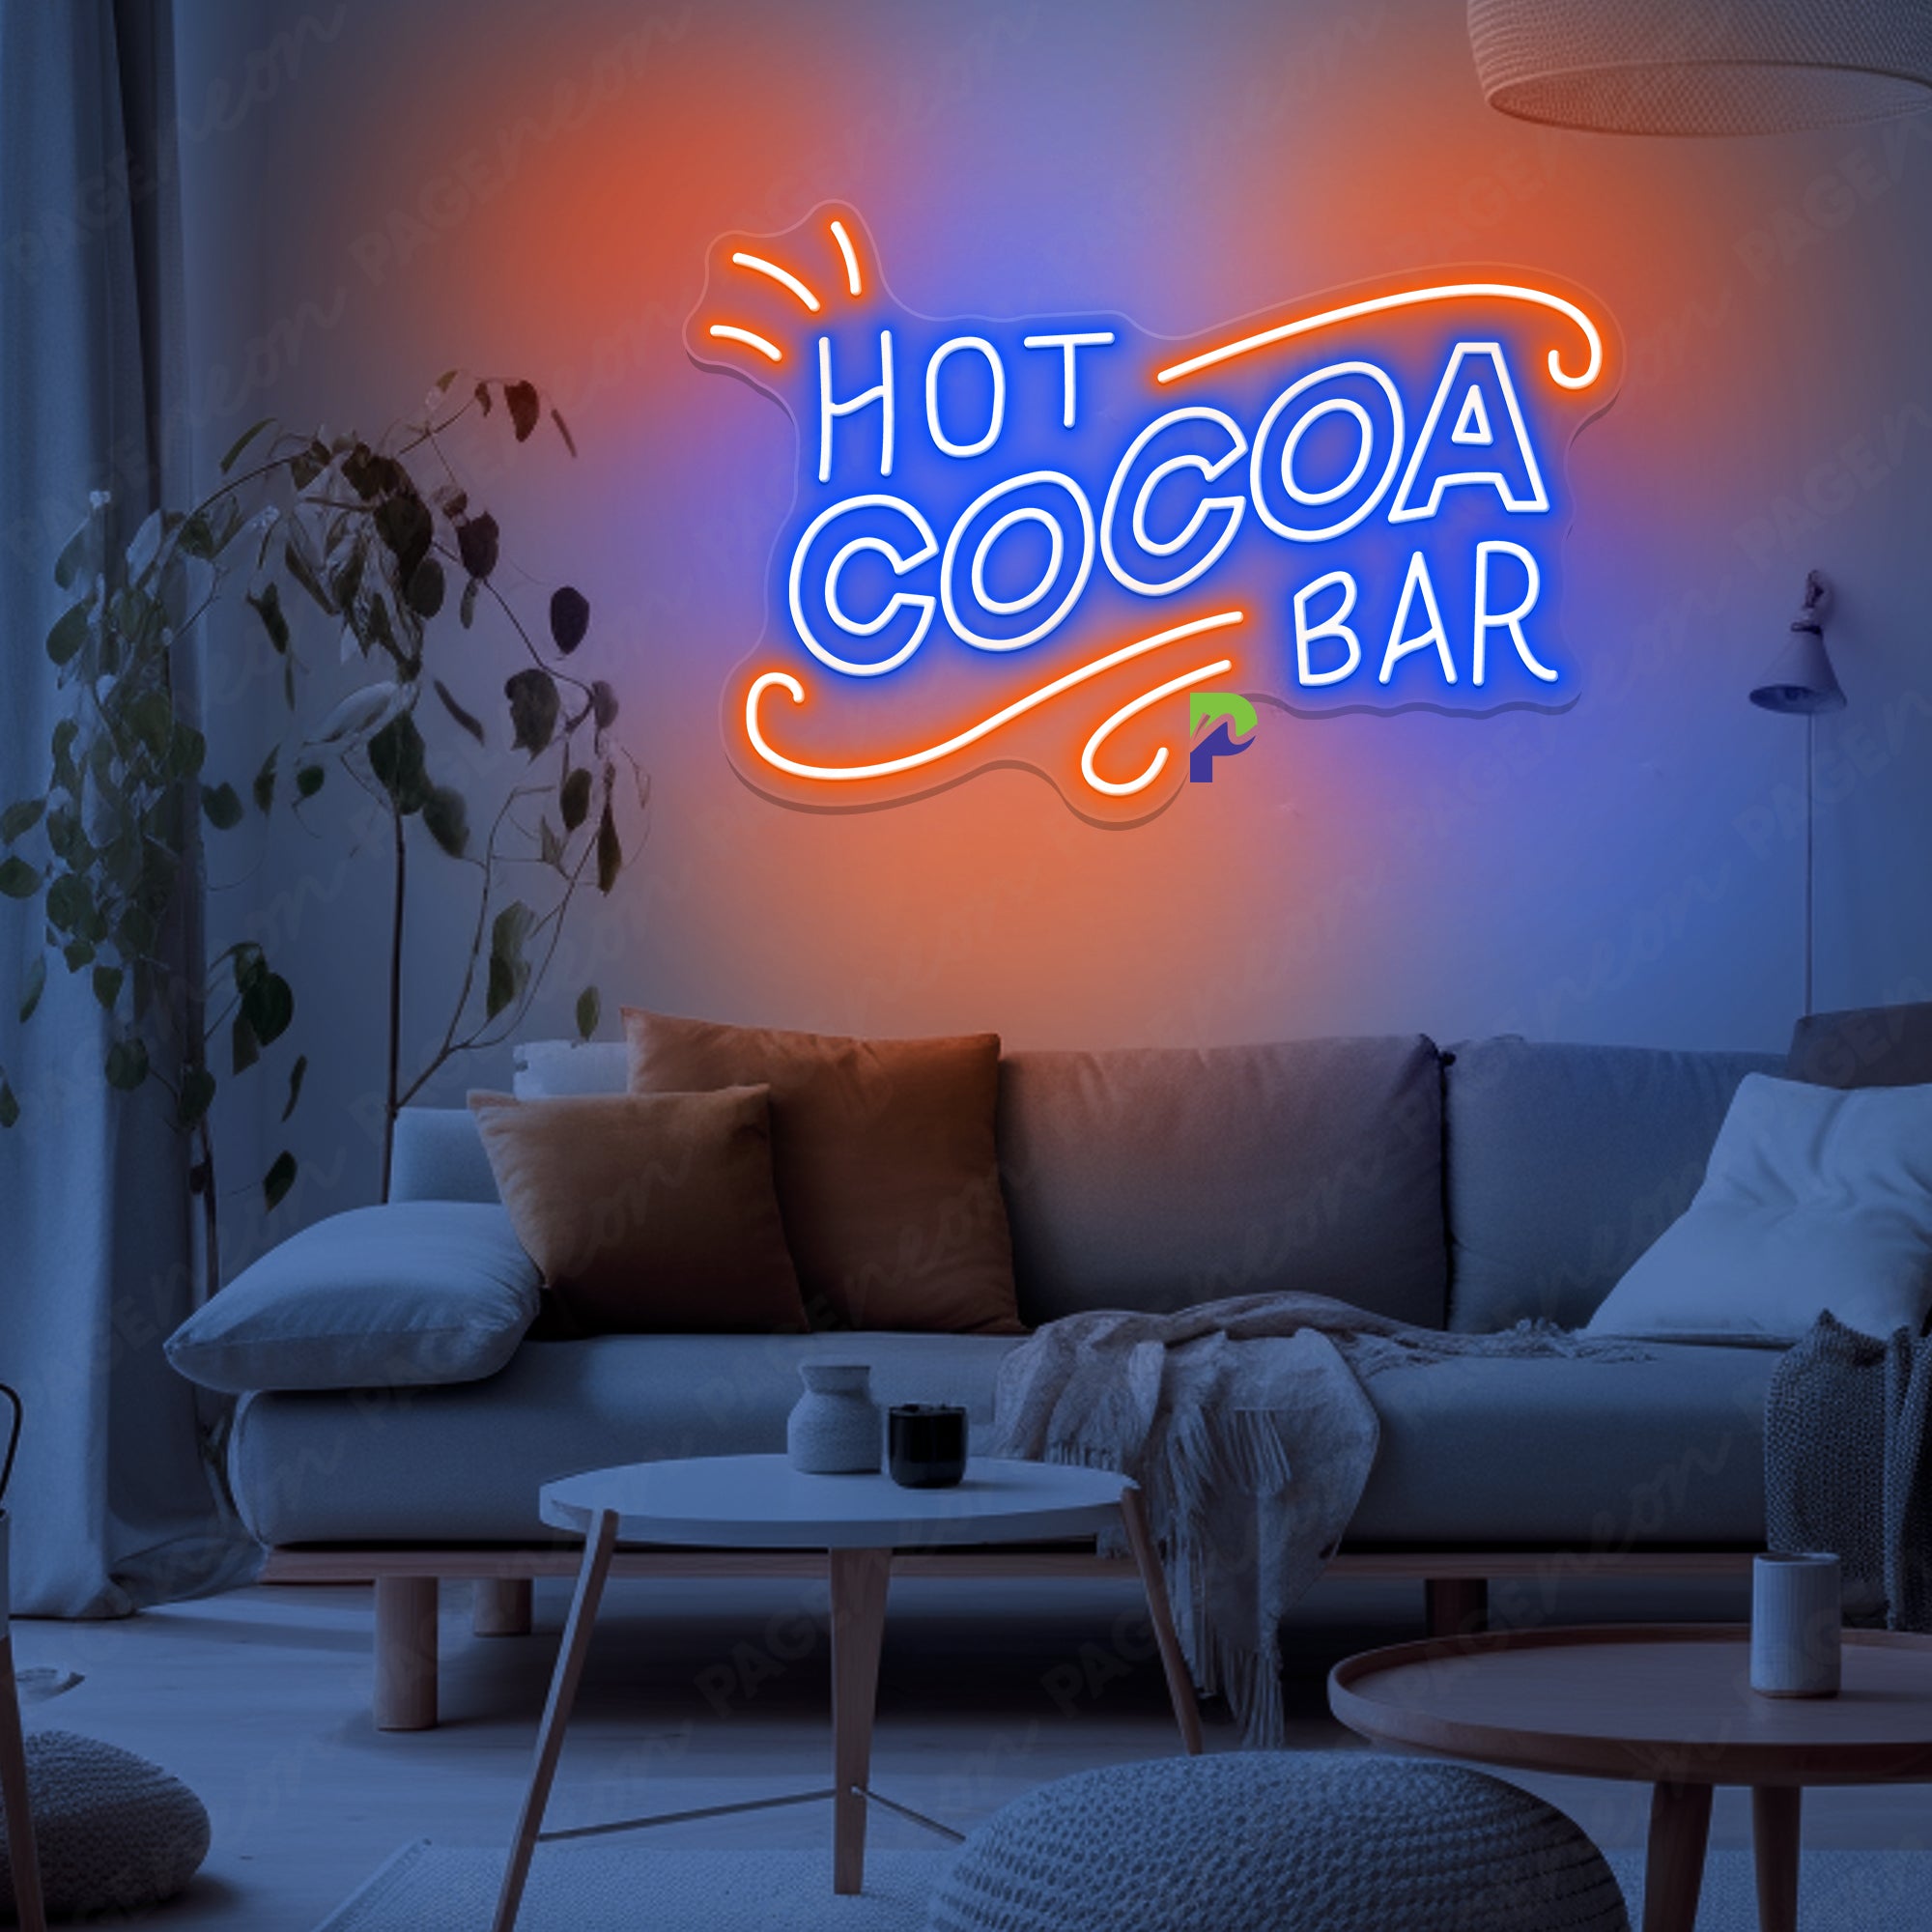 Hot Cocoa Bar Neon Sign Art Word Led Light For Cafe